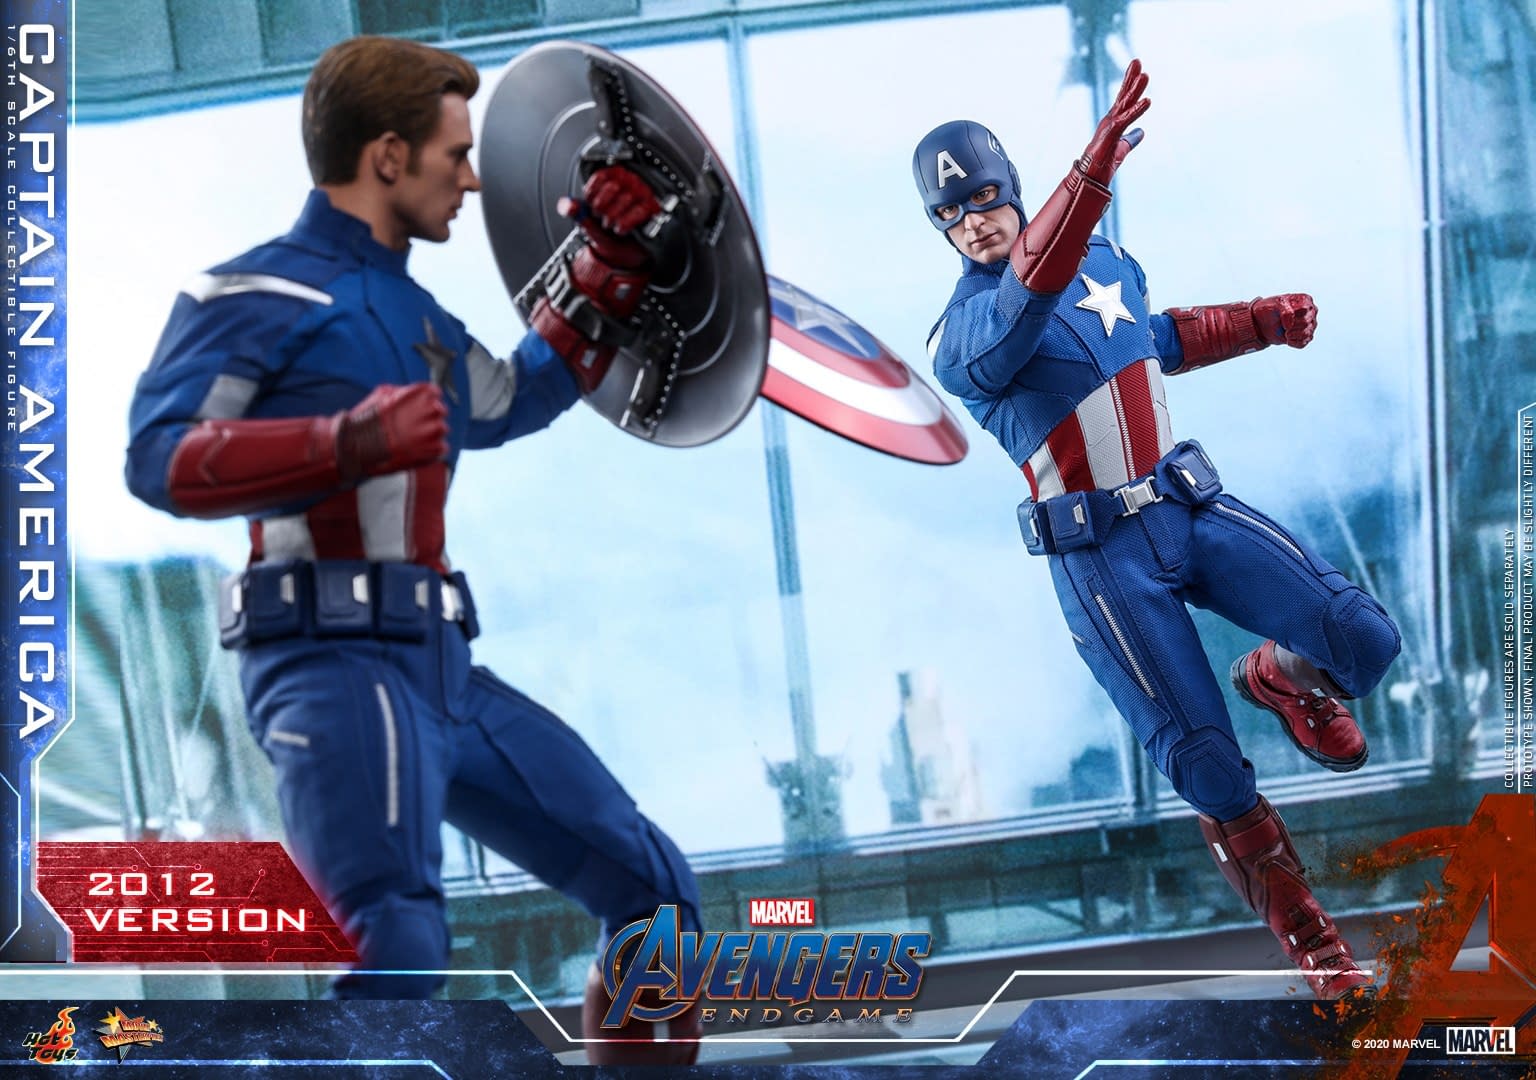 Captain America Goes Back to 2012 with New Hot Toys Figure